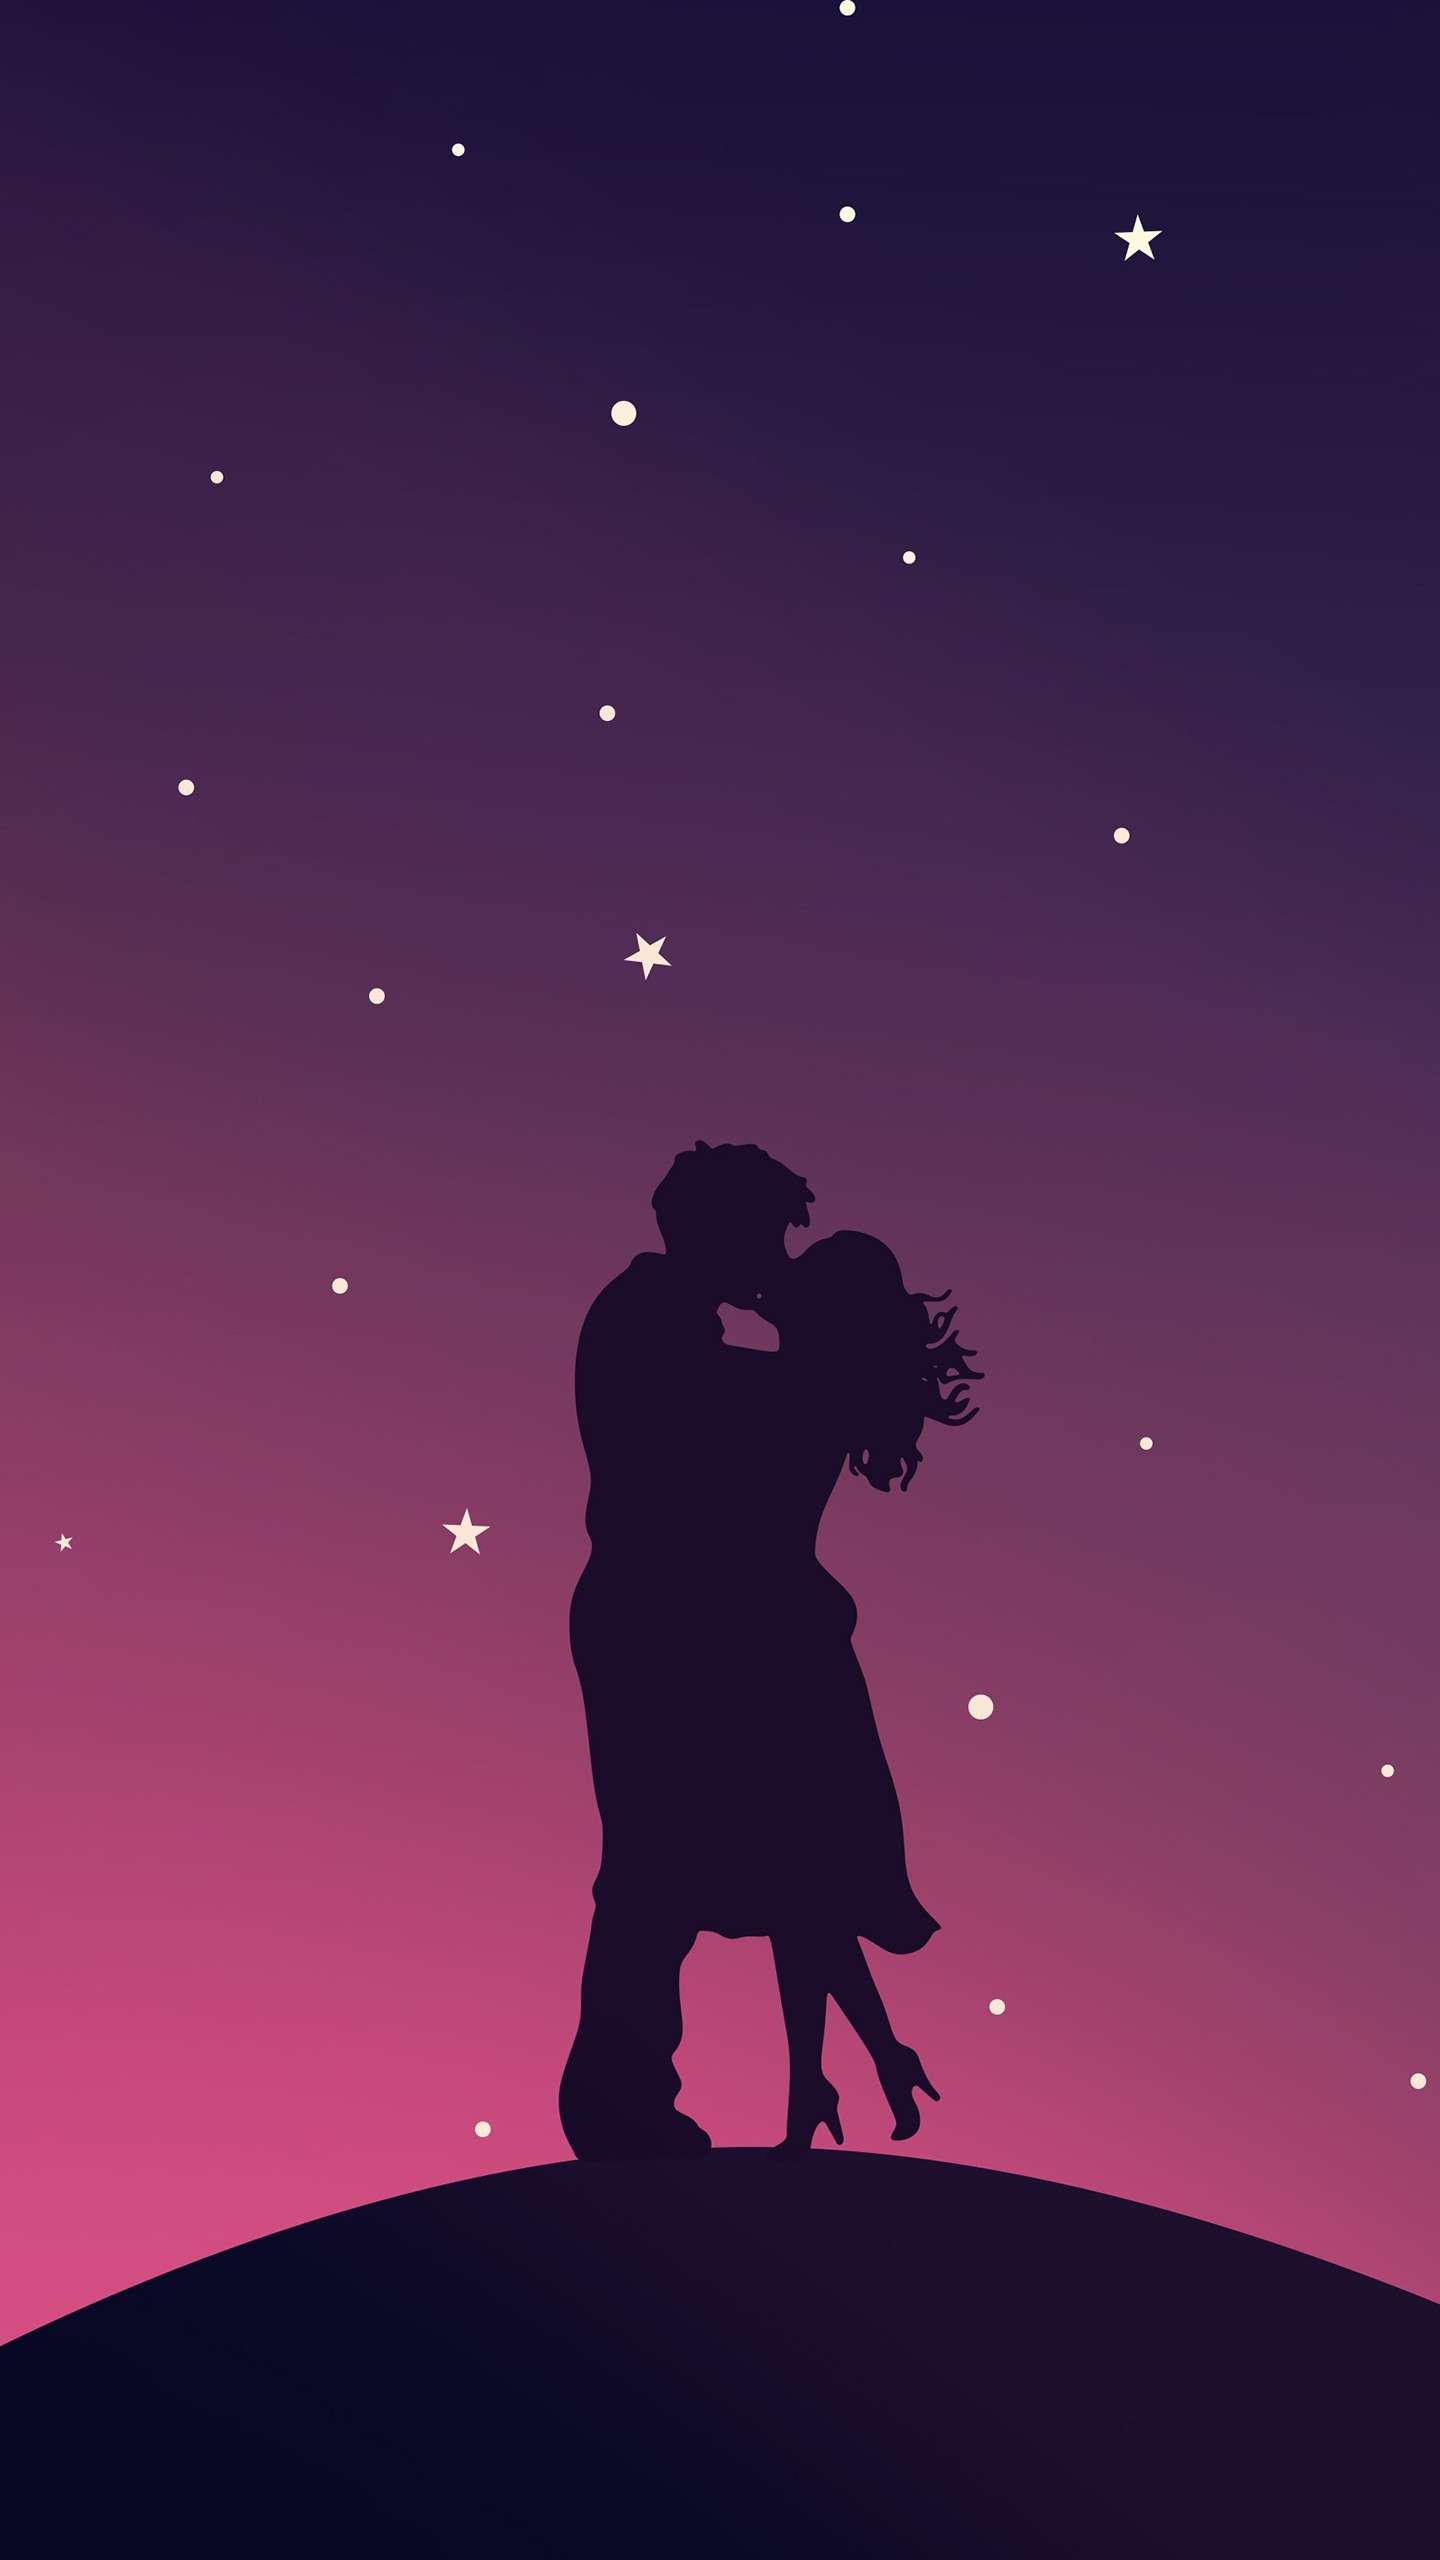 Couples IPhone Wallpapers 83 images